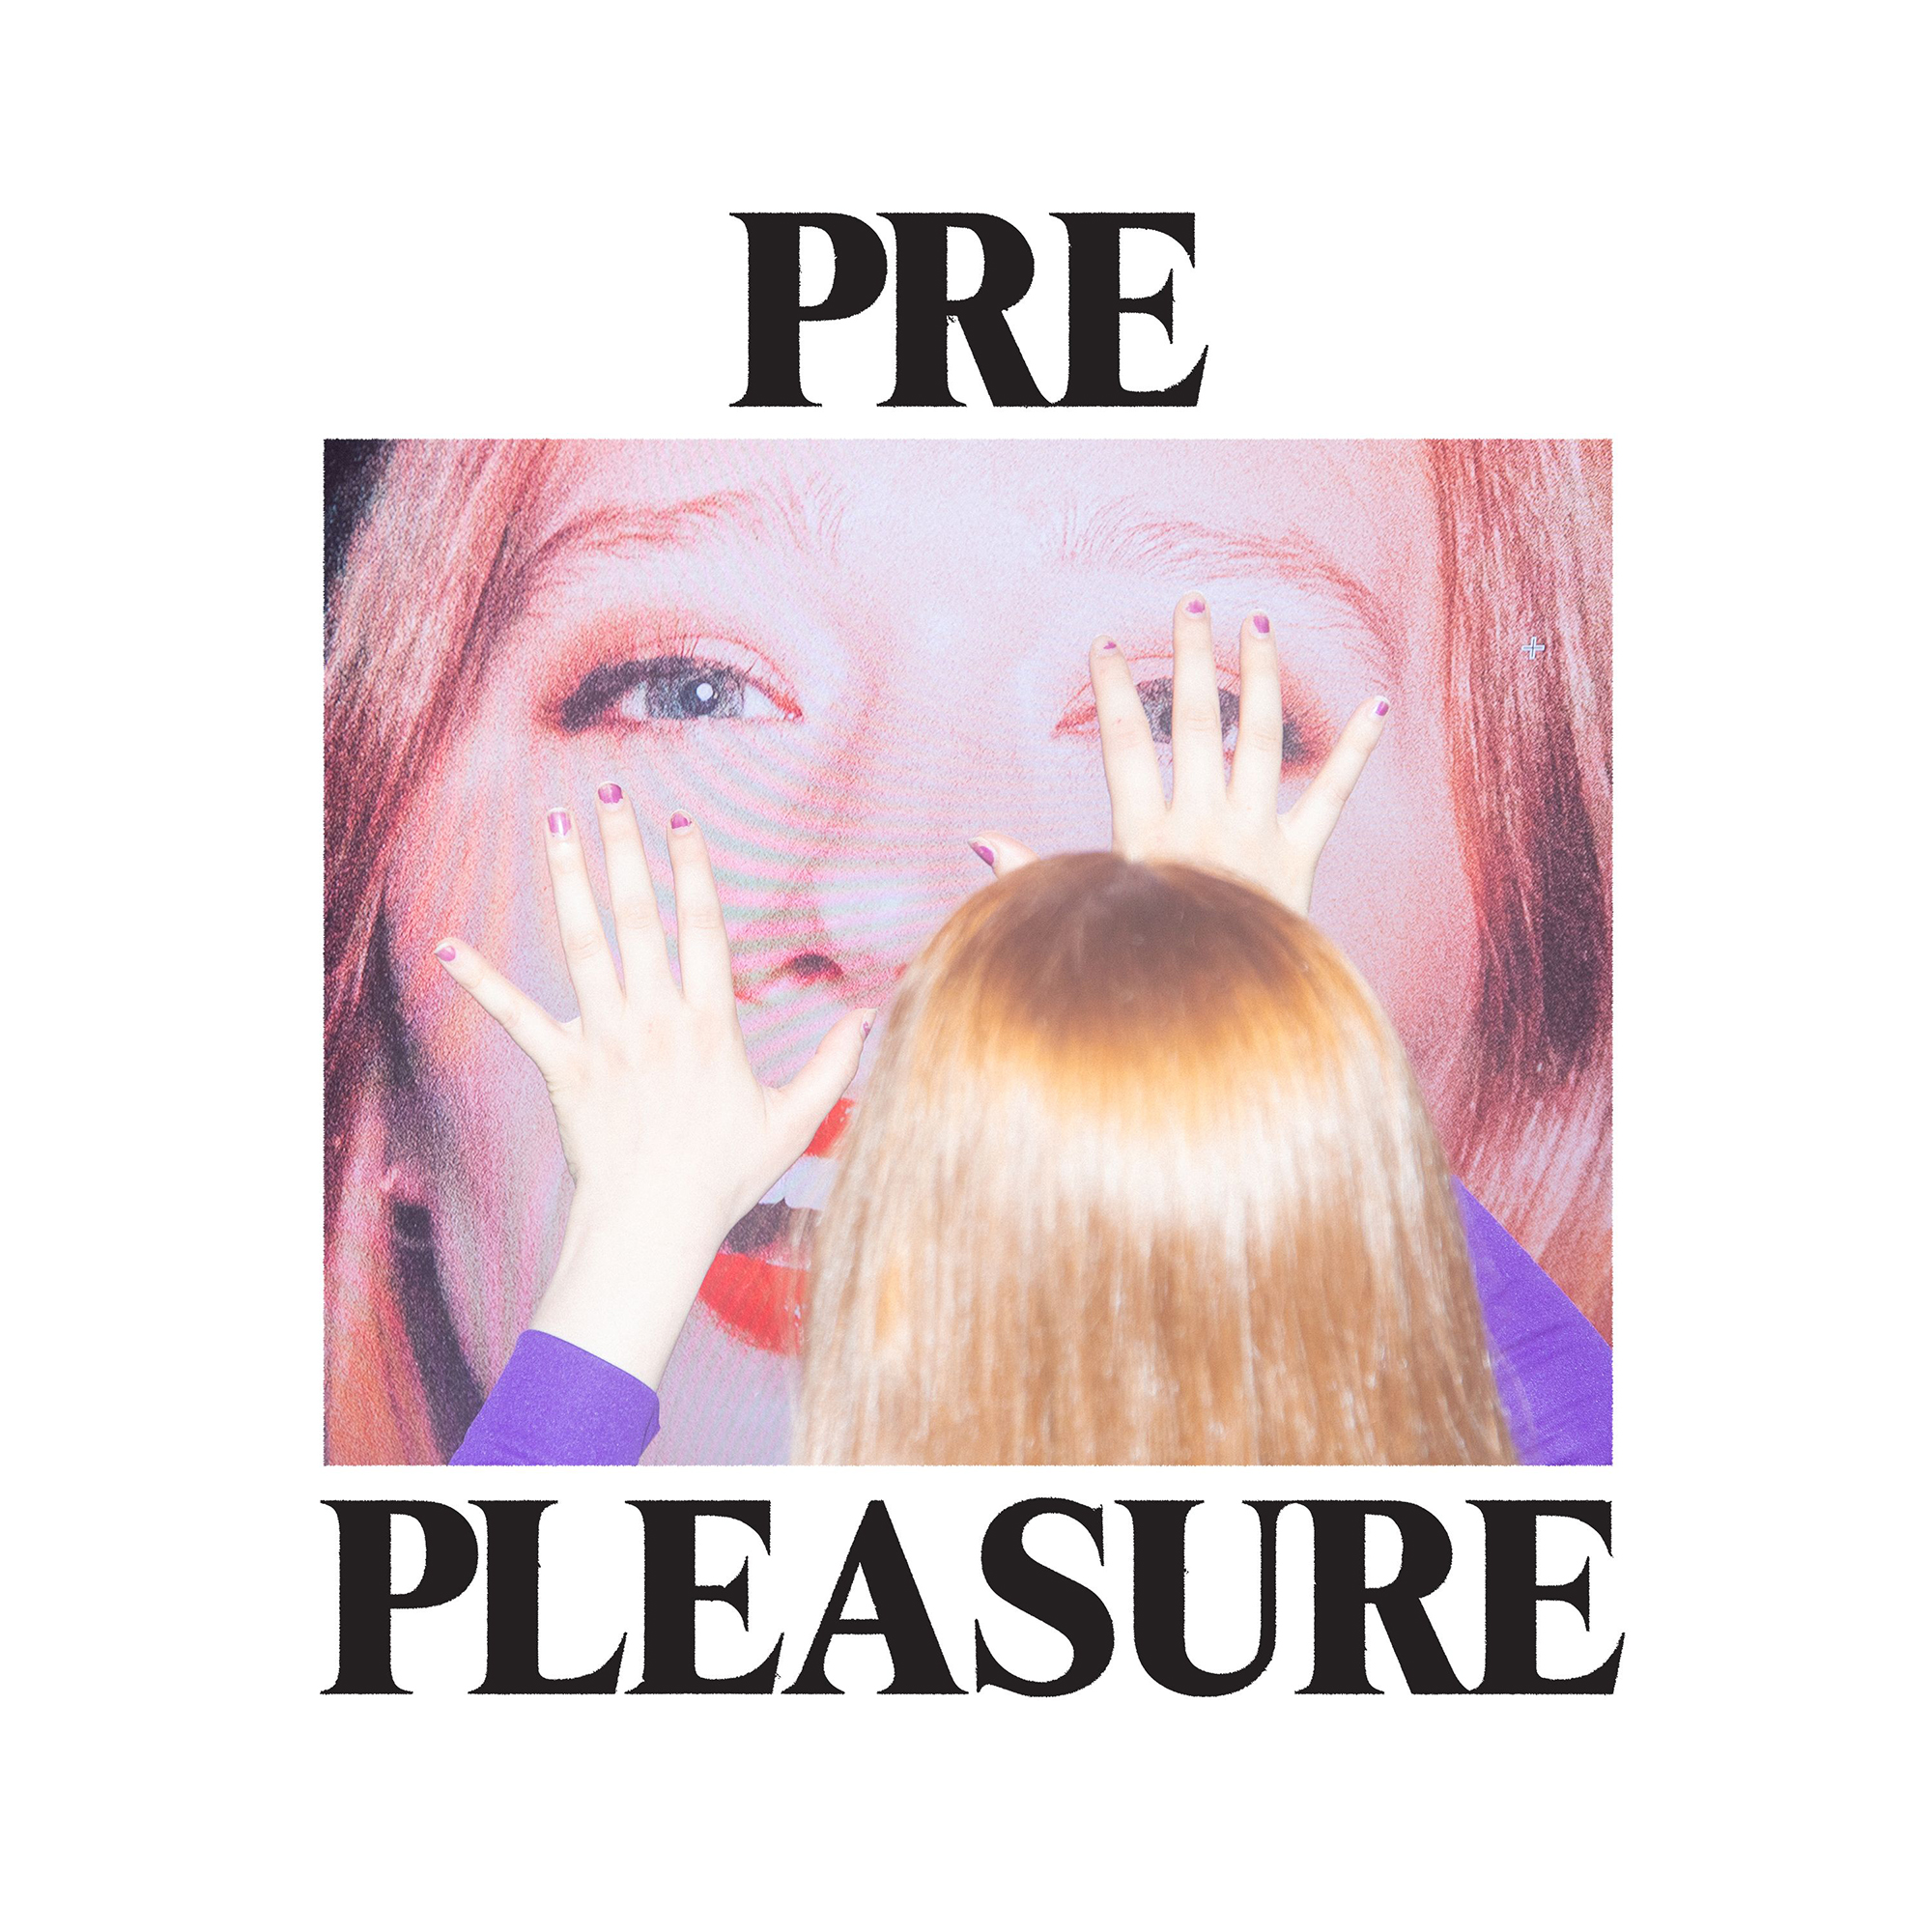 Jaklin Ka Sex Video - Julia Jacklin - New album PRE PLEASURE out August 26, 2022. Pre-order now  and stream the first single, \